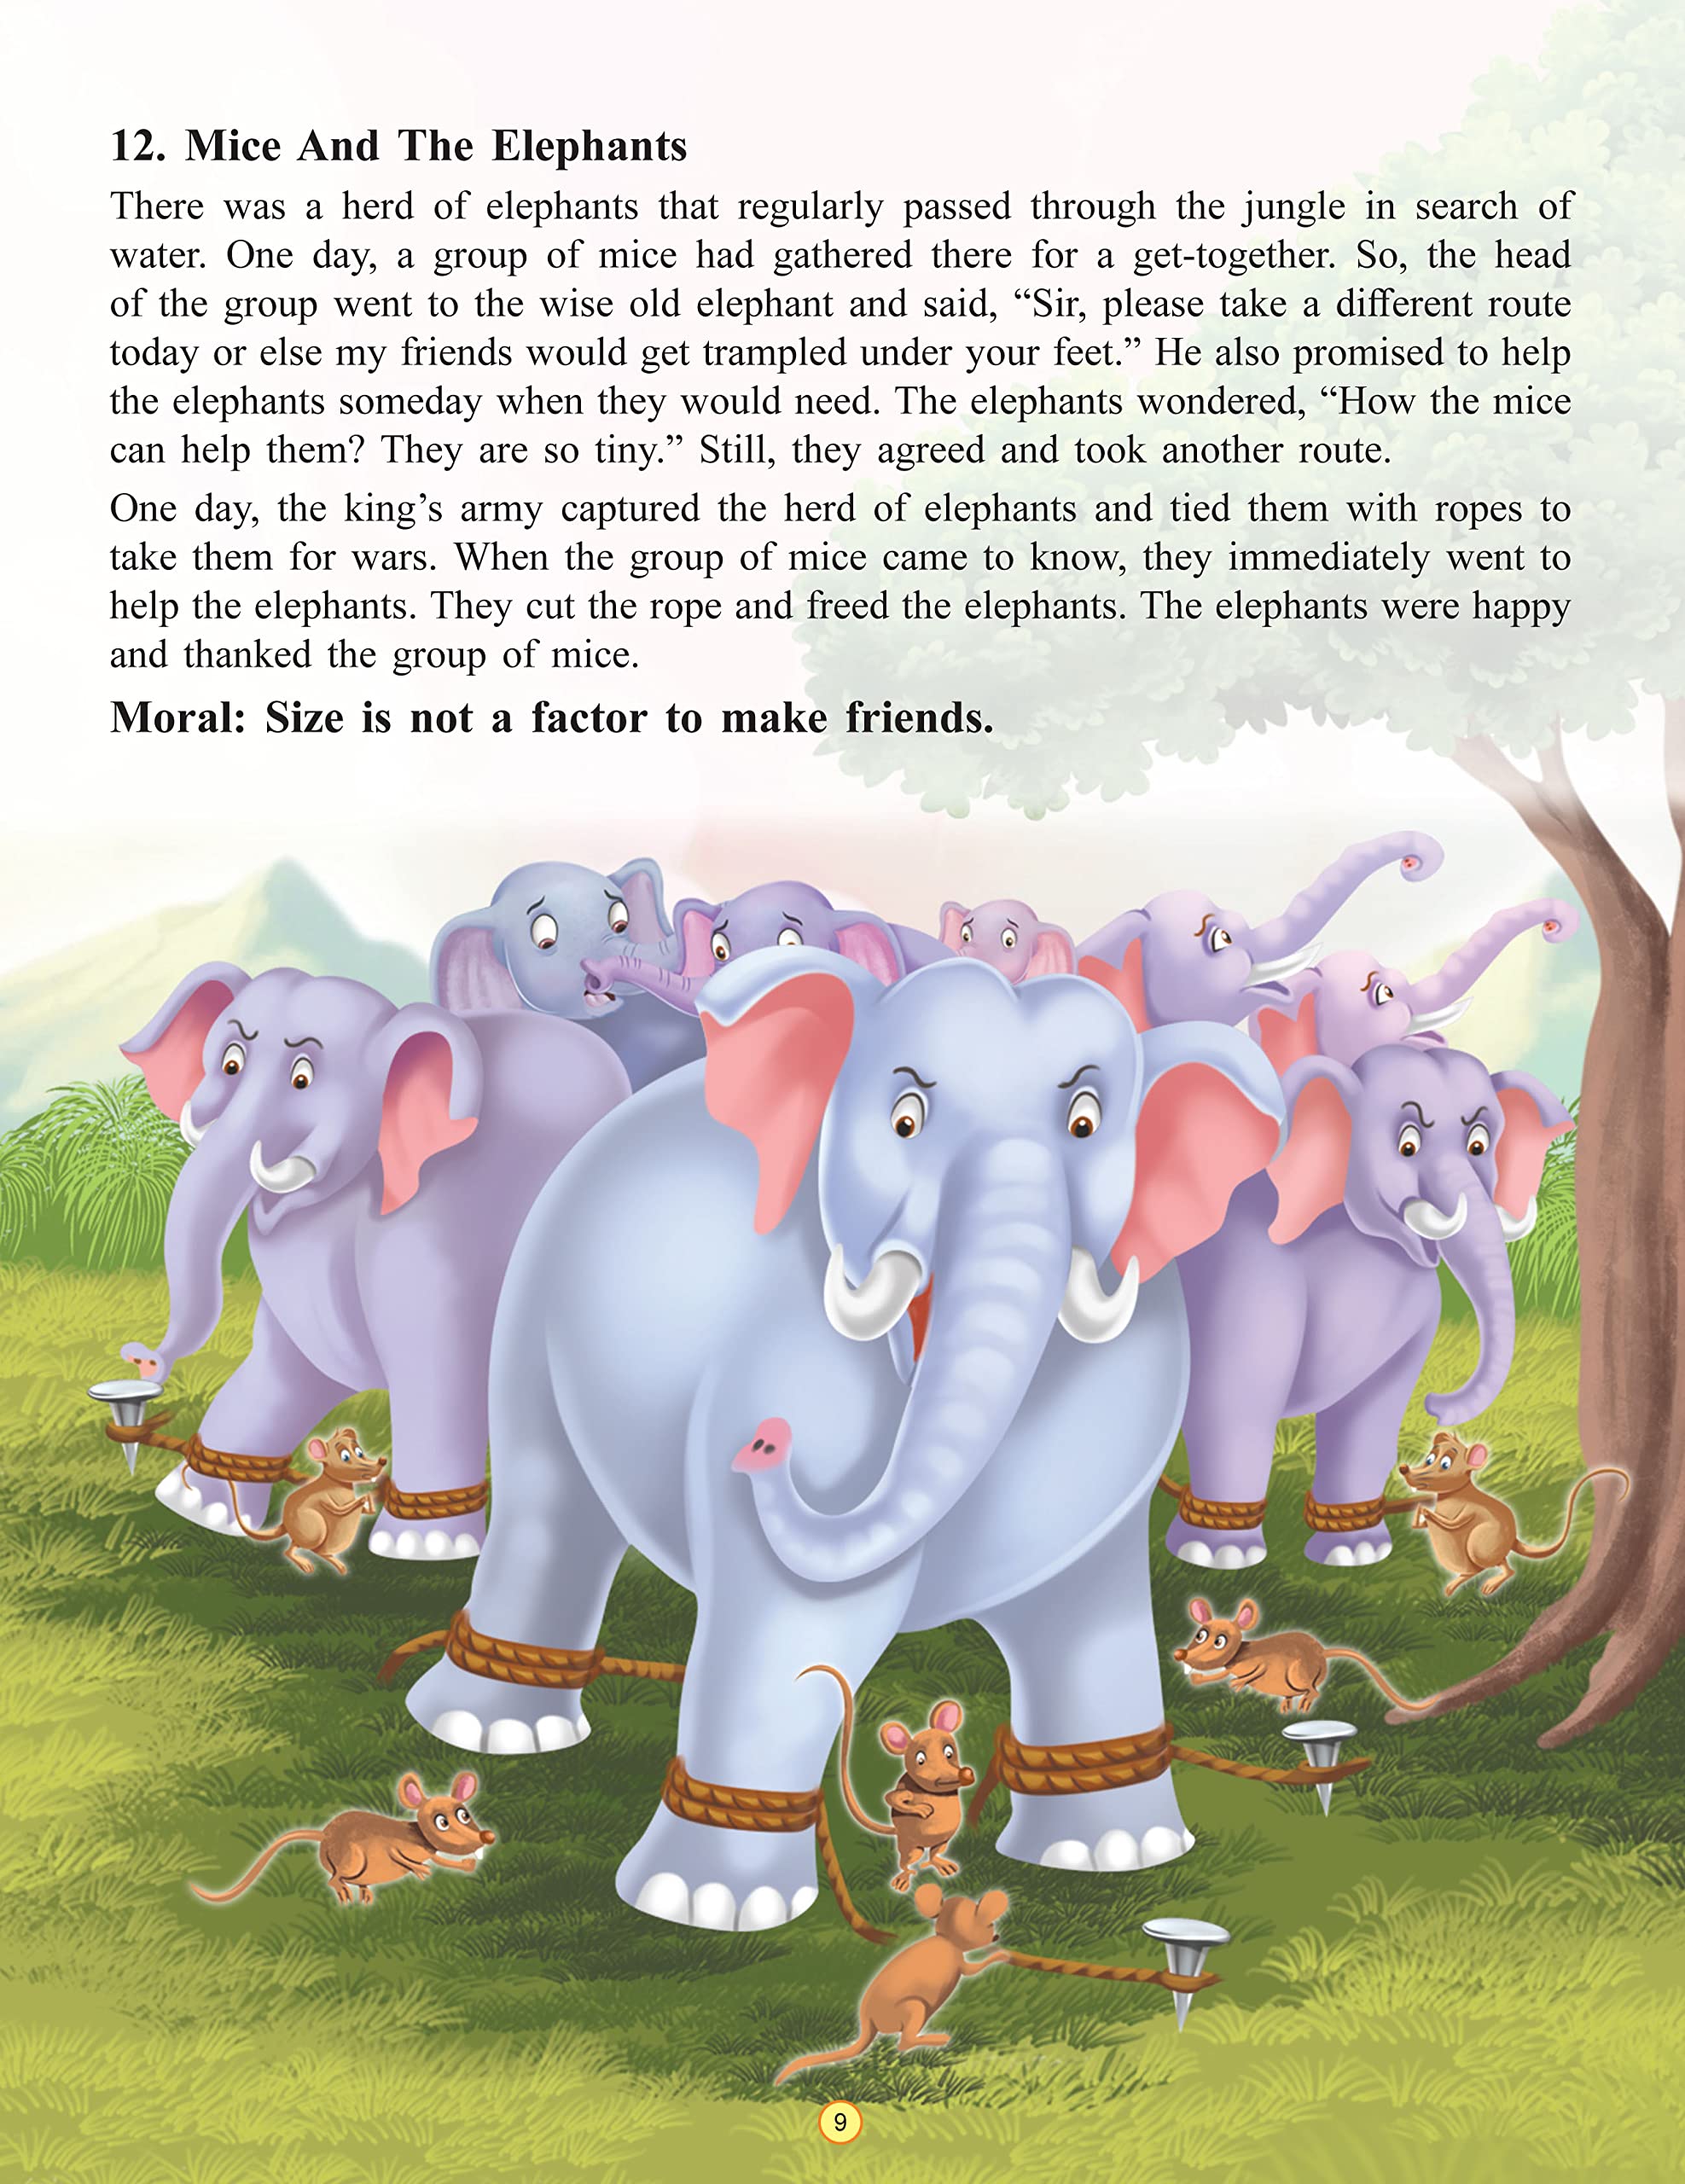 Dreamland 101 Moral Stories - A Story Book for Kids (English)